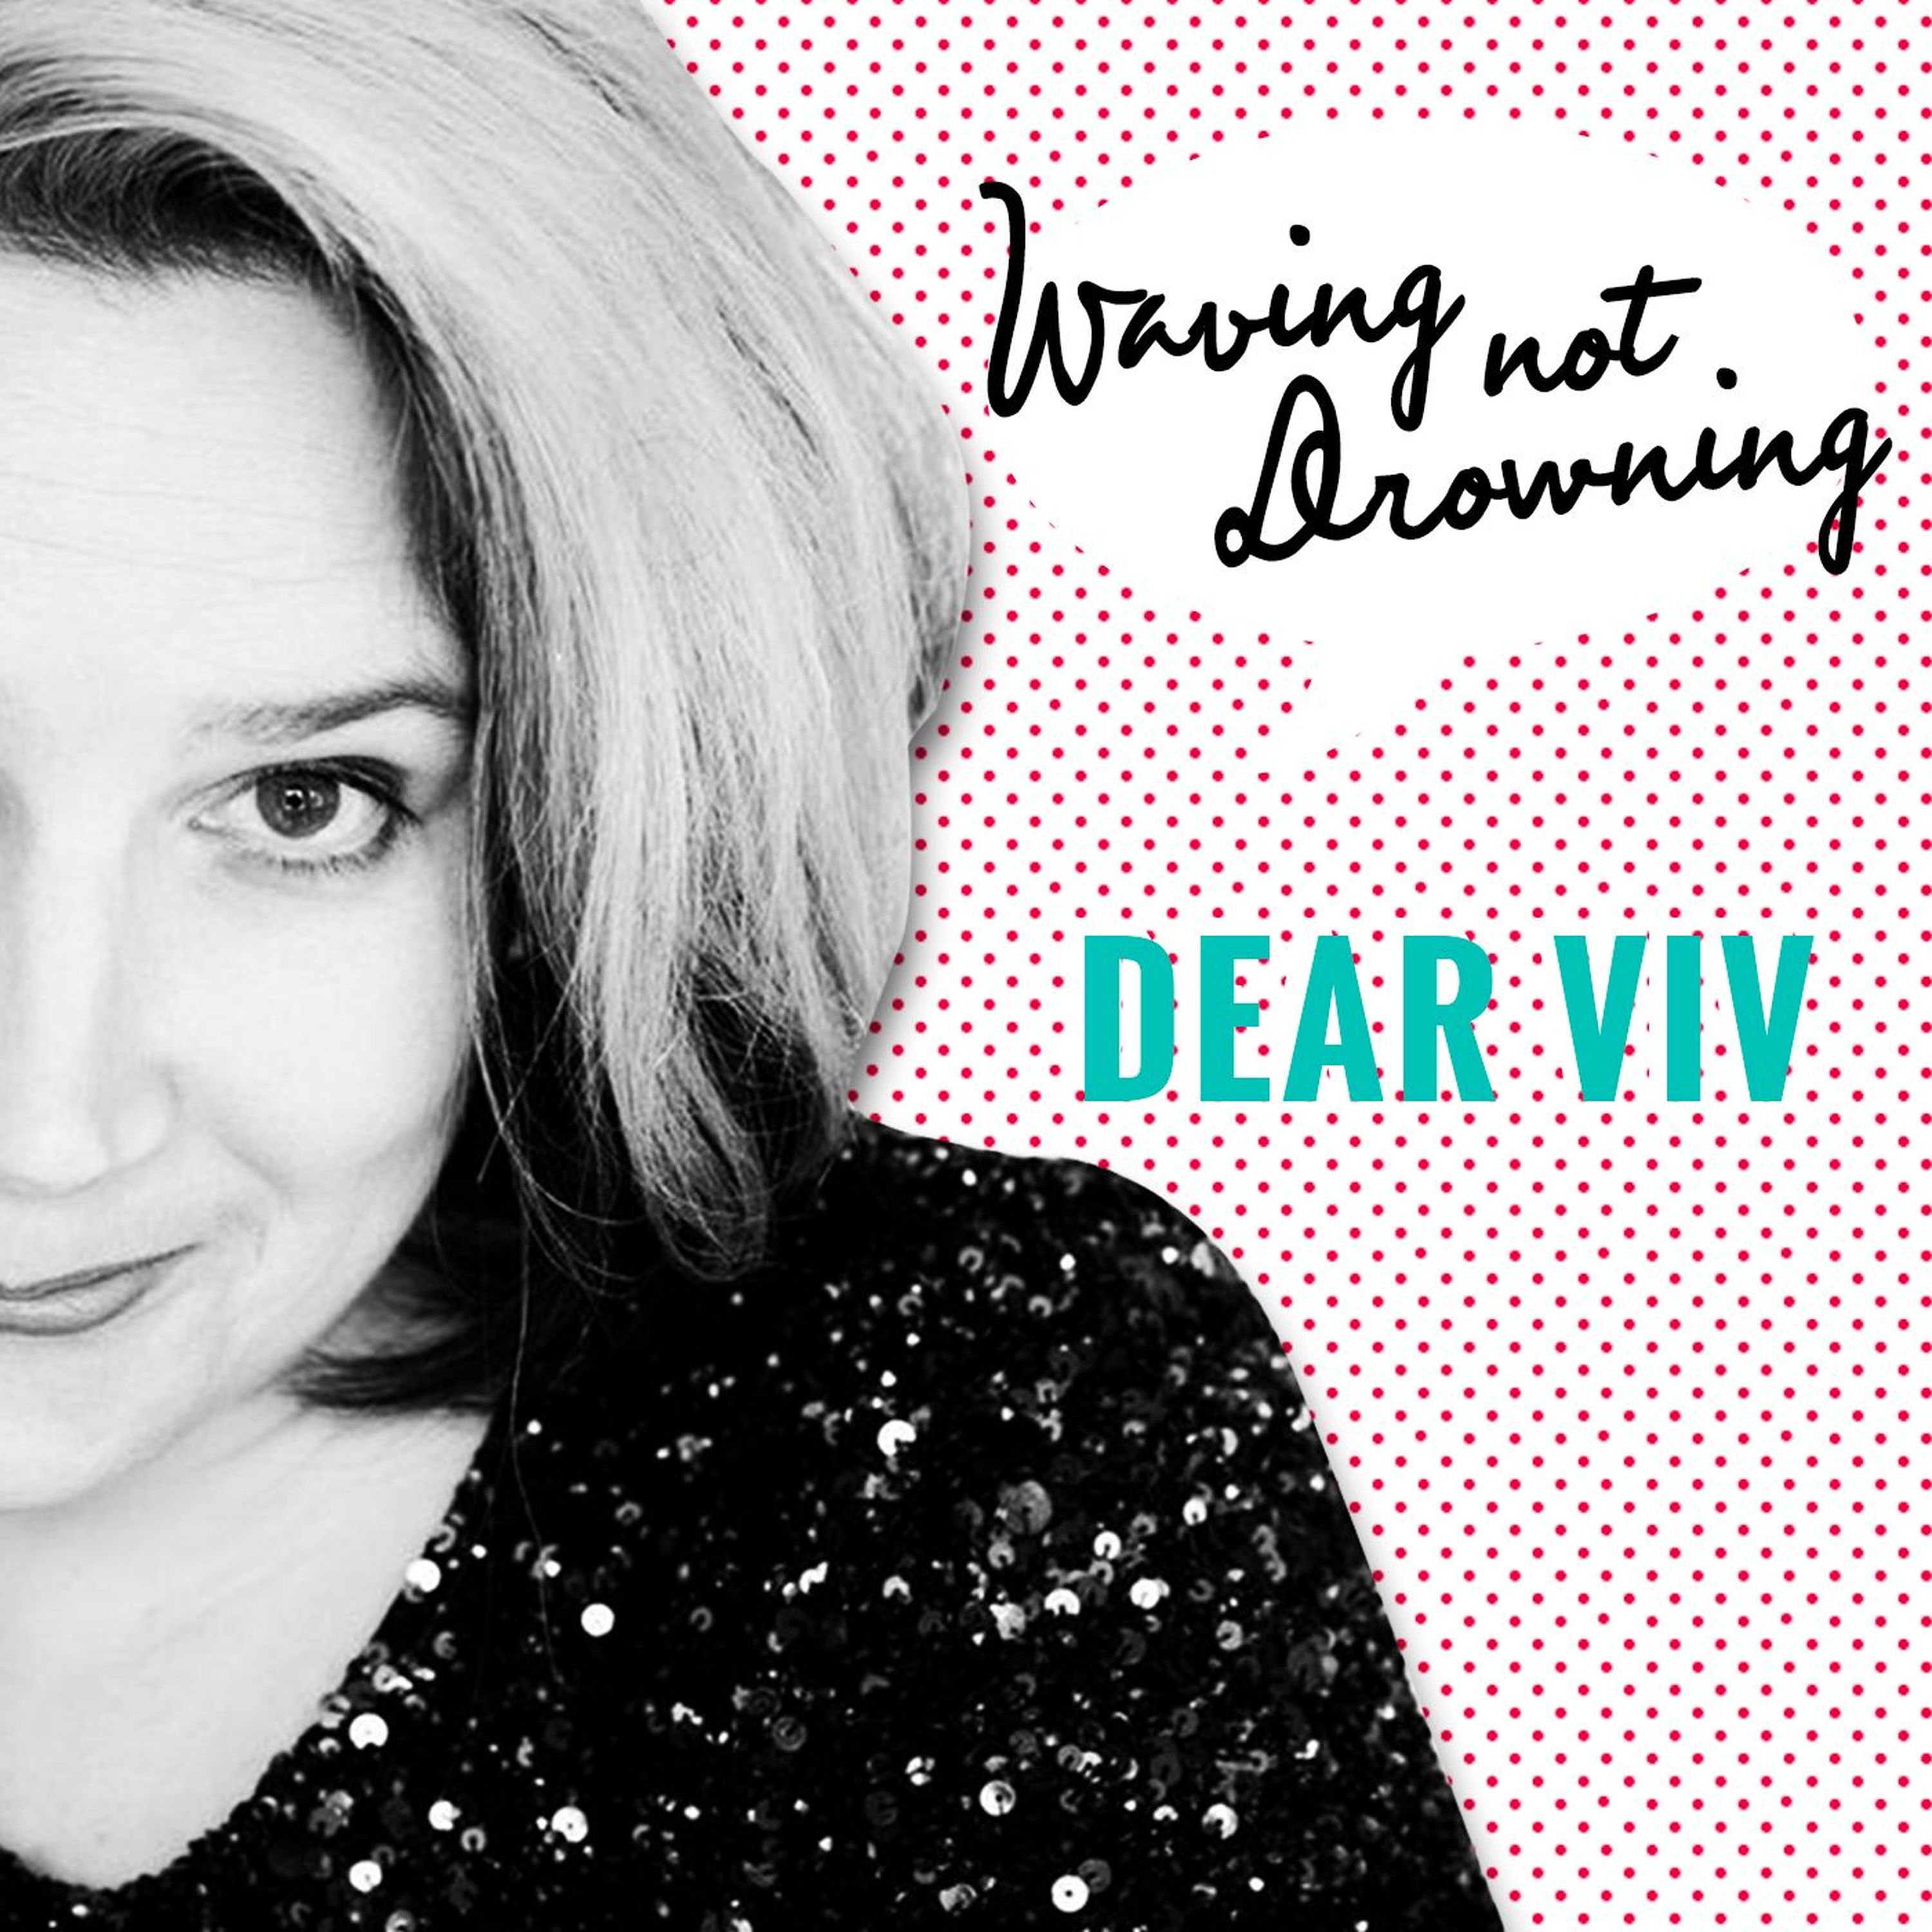 Dear Viv: I’m worried about getting back out there after such a long time